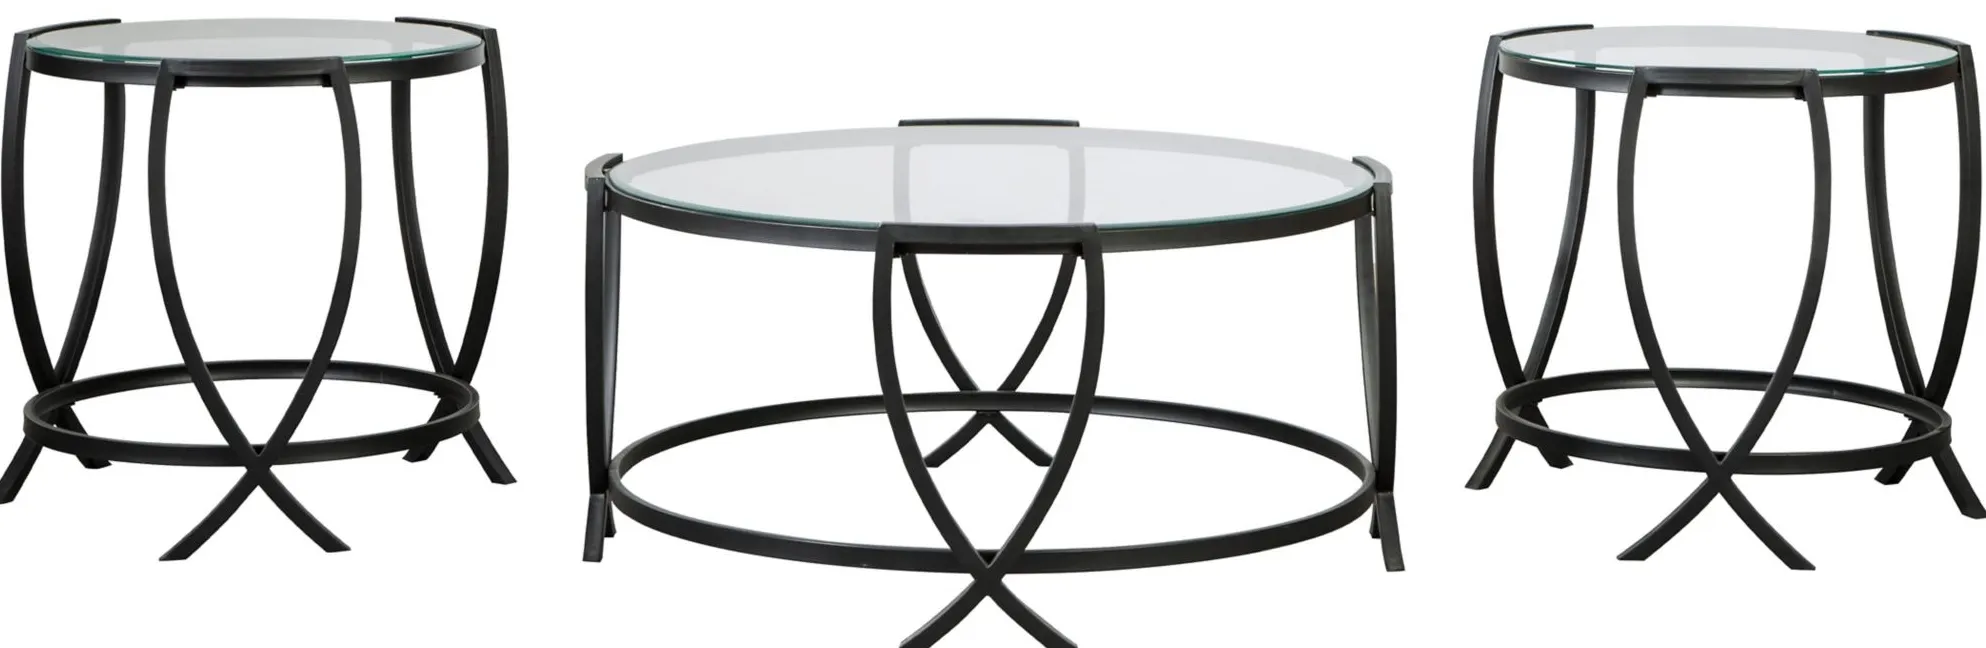 Tandy 3PK Occasional Tables in Black by Ashley Furniture